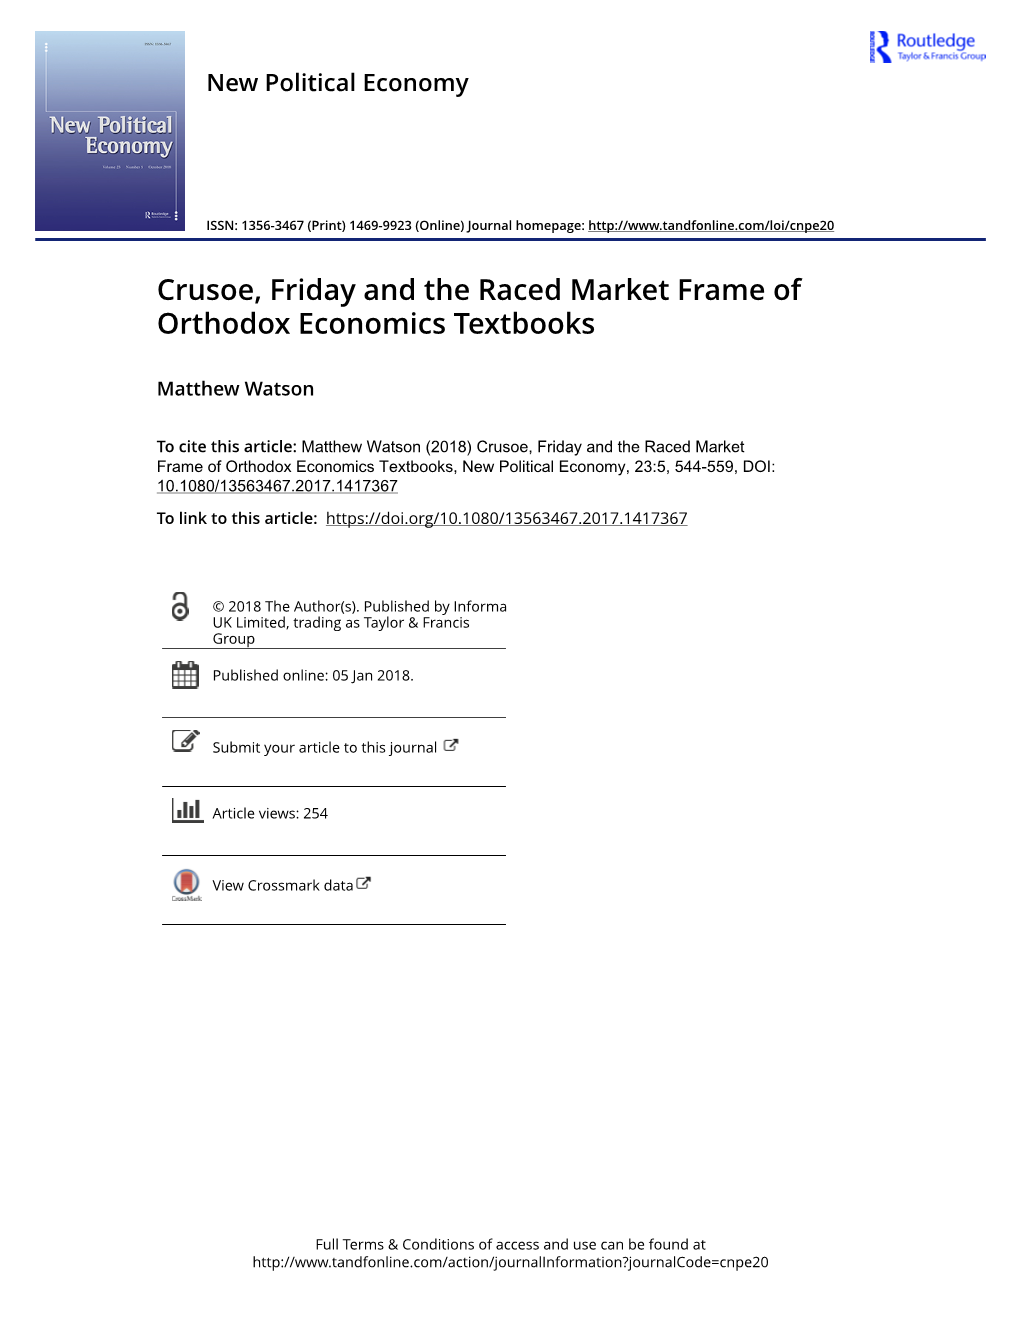 Crusoe, Friday and the Raced Market Frame of Orthodox Economics Textbooks